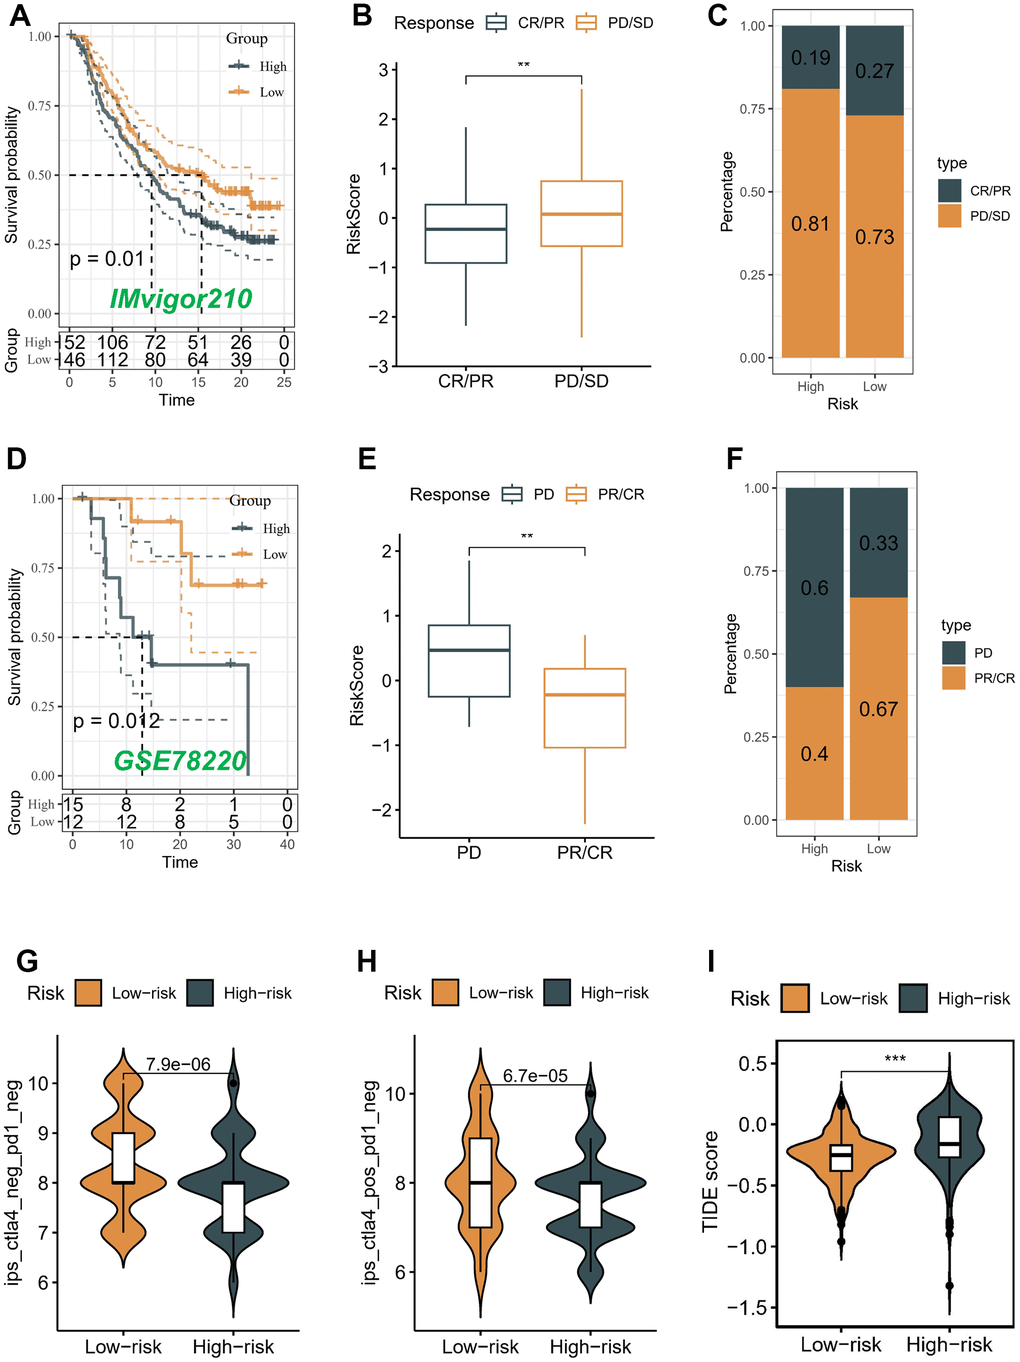 Correlation of the risk score with immunotherapy response in two cohorts. Survival analyses (A), Distribution of risk score in different immunotherapy response groups (B), and Response to anti-PD-L1 therapy (C) between low- and high-risk groups in advanced urothelial cancer cohort (IMvigor210 cohort). Survival analyses (D), Distribution of risk score in different immunotherapy response groups (E), and Response to anti-PD-1 therapy (F) between low- and high-risk groups in melanoma cohort (GSE78220). (G–I) Differences in IPS and TIDE among individuals categorized as high- and low-risk.